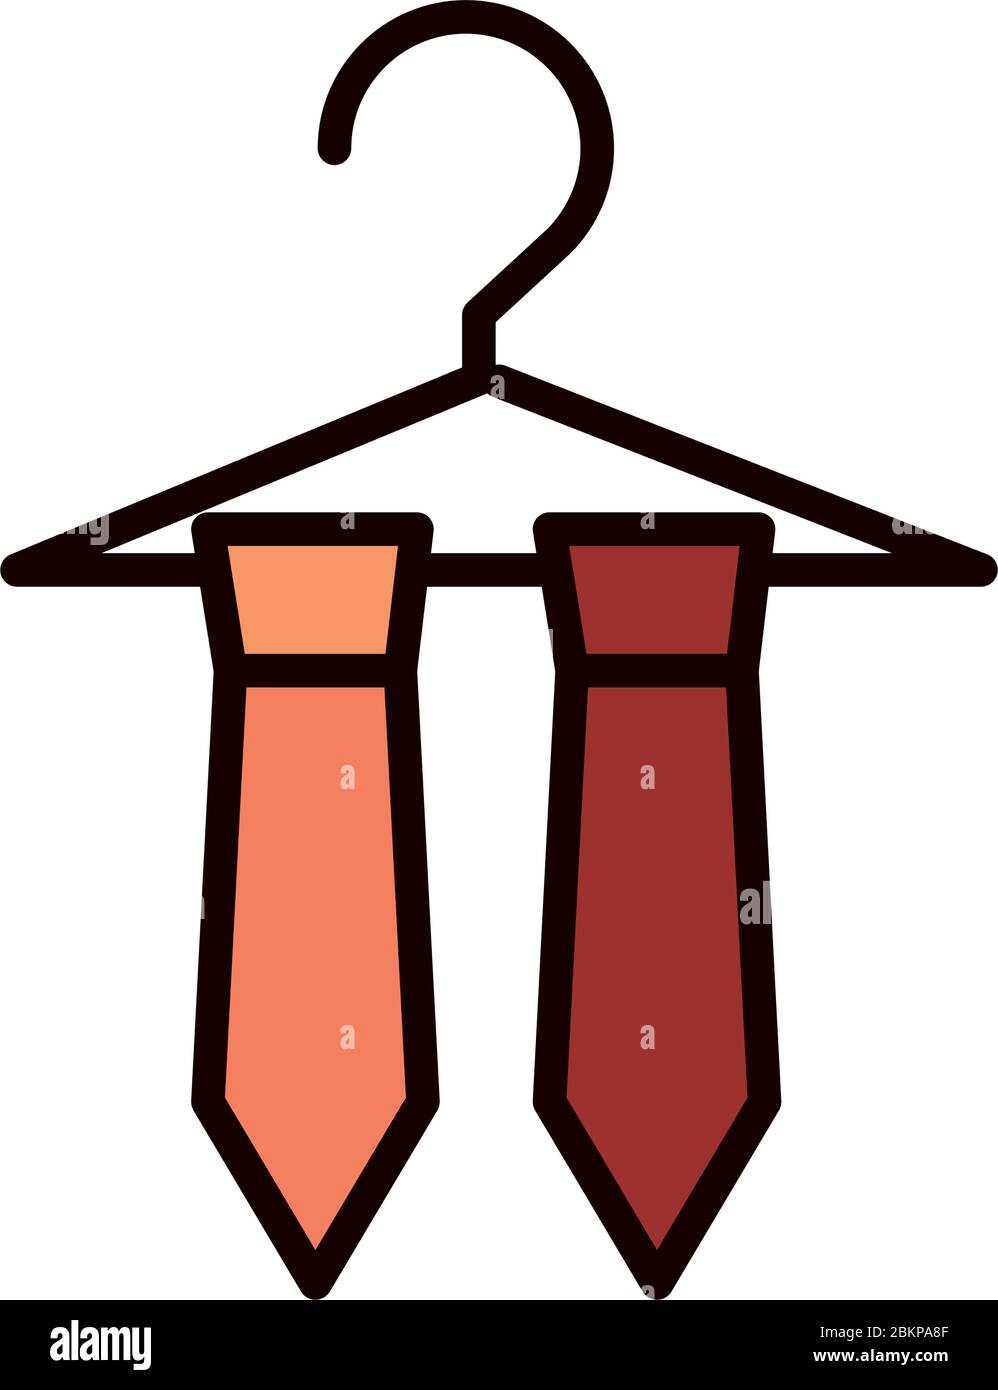 https://c8.alamy.com/comp/2BKPA8F/necktie-in-hanger-clothes-fashion-celebration-vector-illustration-line-and-fill-icon-2BKPA8F.jpg